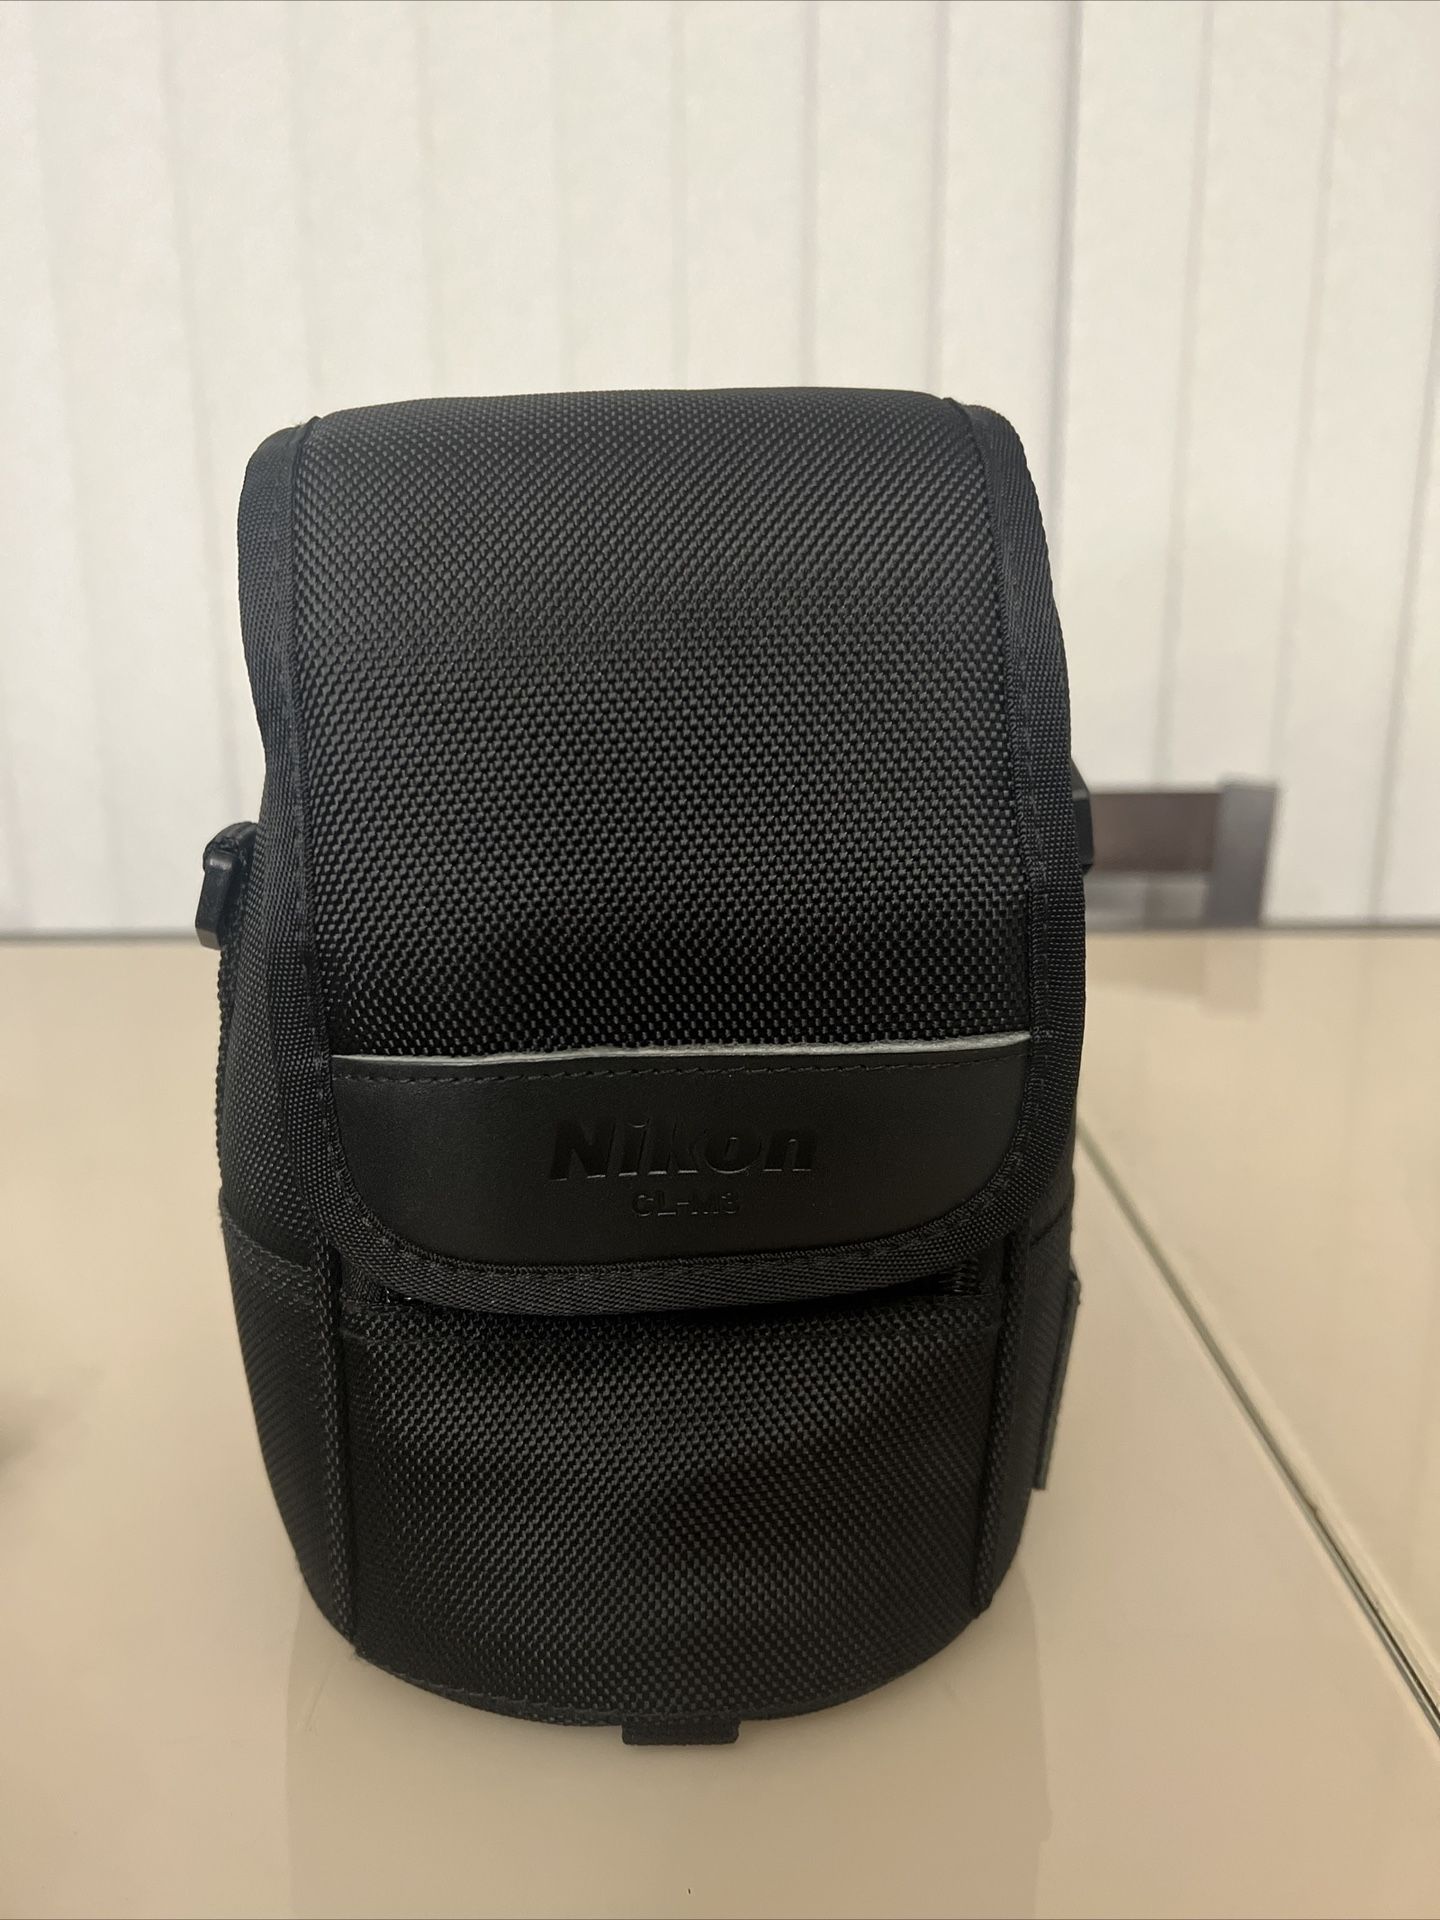 Nikon CL-M3 Lens Case Only For AF-S 14-24mm f/2.8G & AF-S 24-70mm f/2.8G lenses. The case is in excellent condition and currently does not have a stra